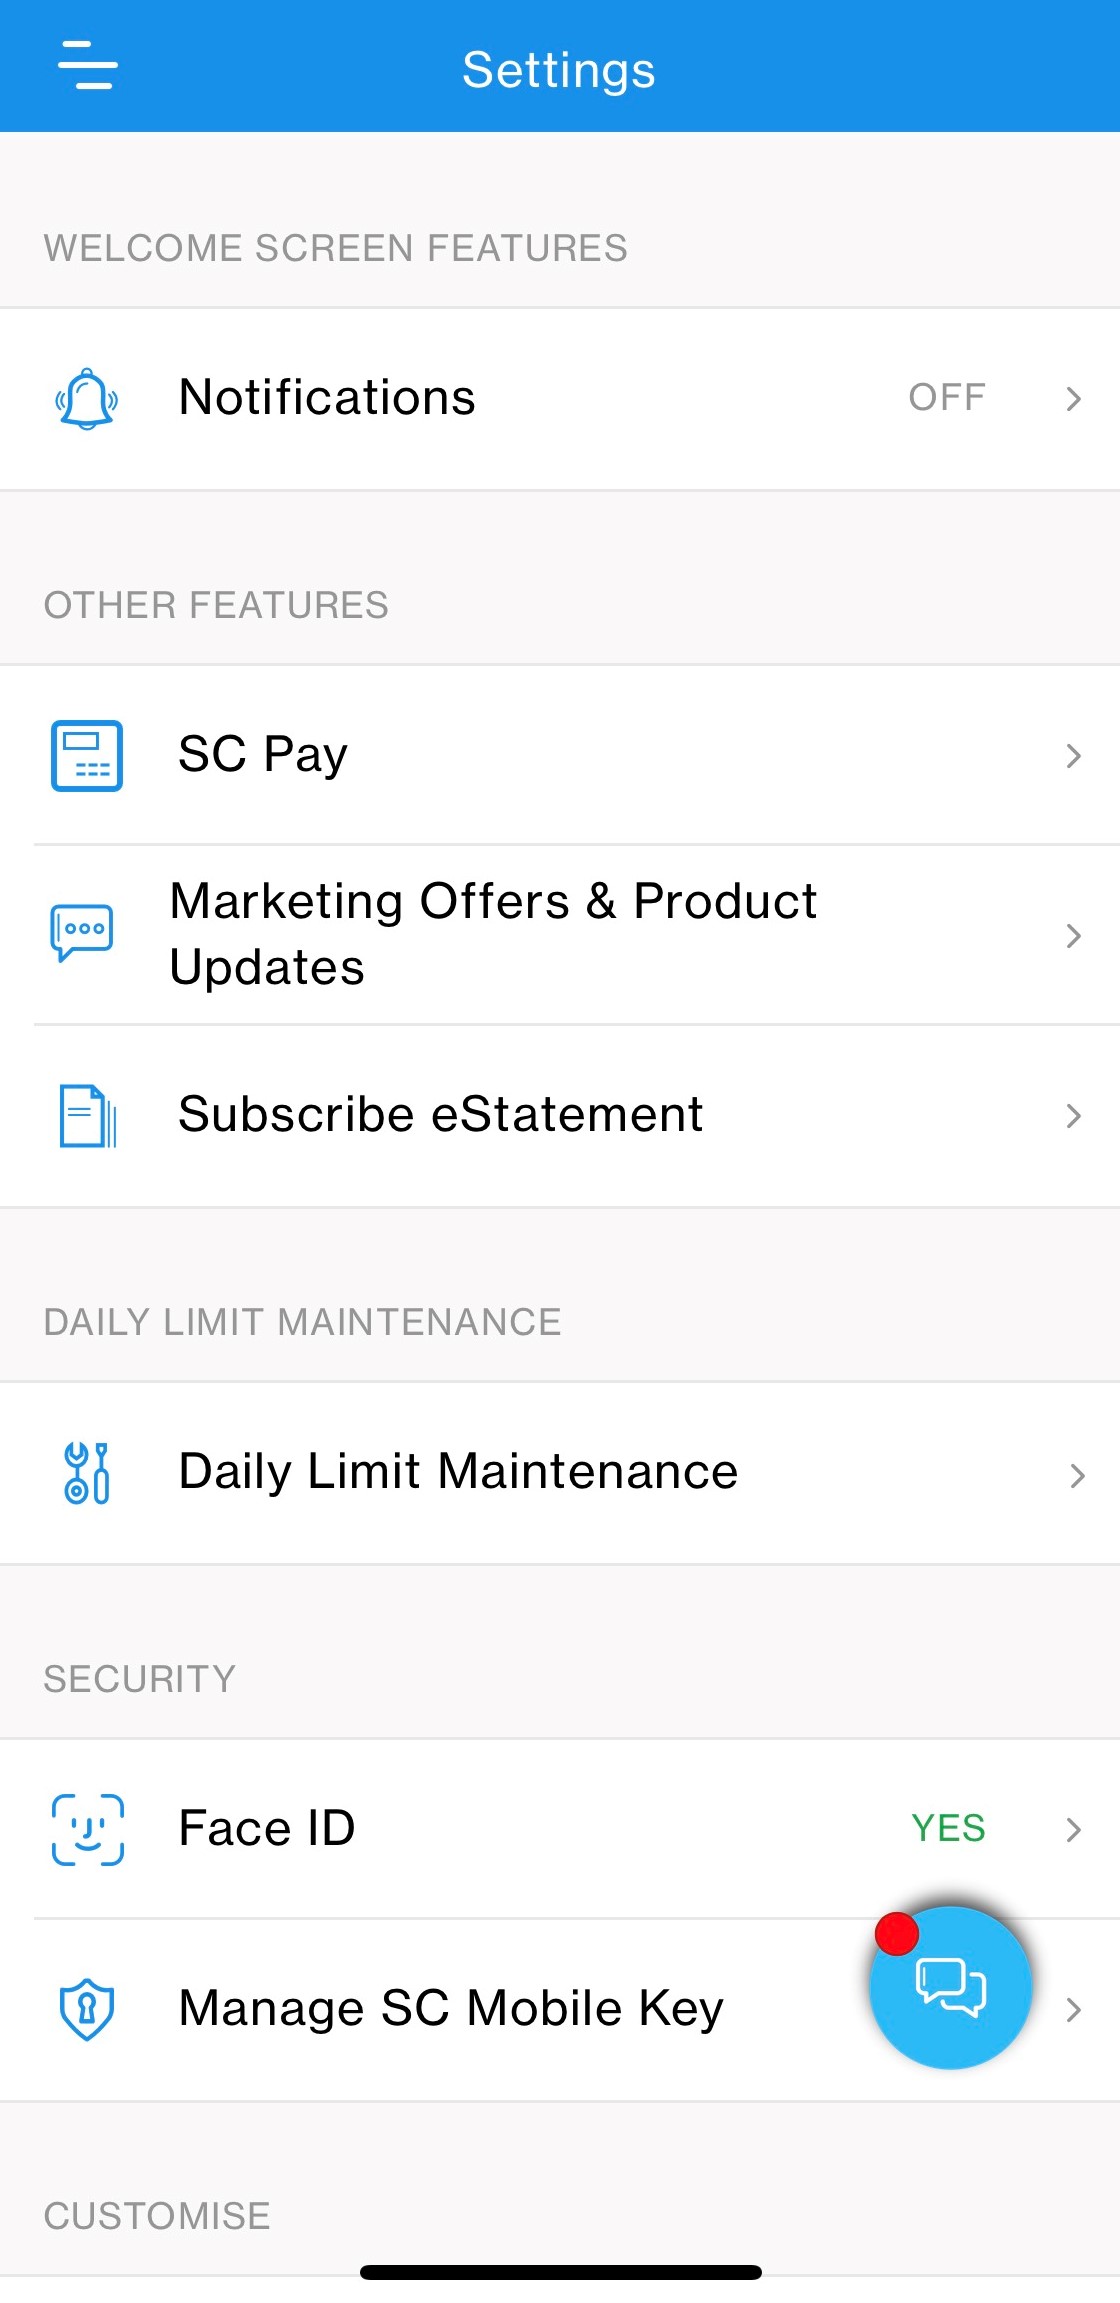 Existing SC Mobile App User Manage Marketing Offers & Product Updates Step 2